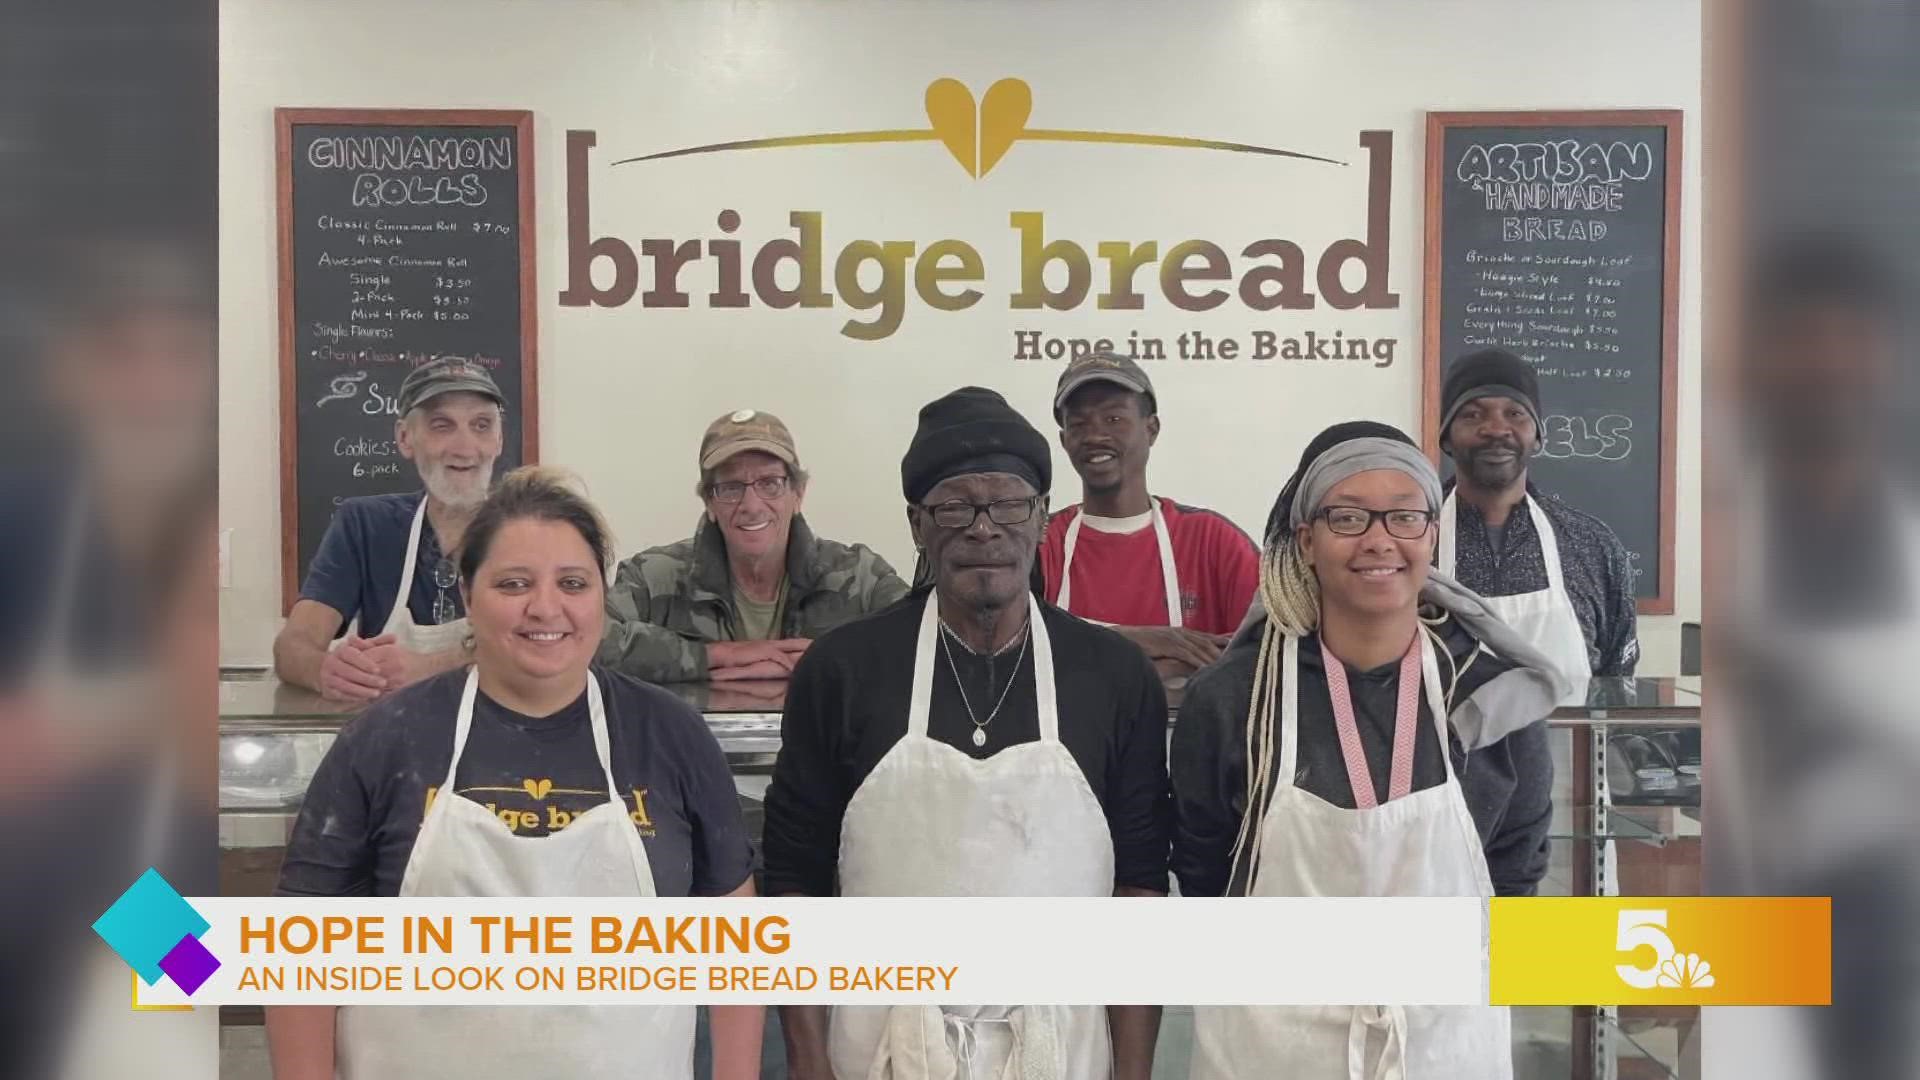 Bridge Bread Bakery is a nonprofit who strives to employ individuals experiencing homelessness and provide them with marketable skills and reliable employment.